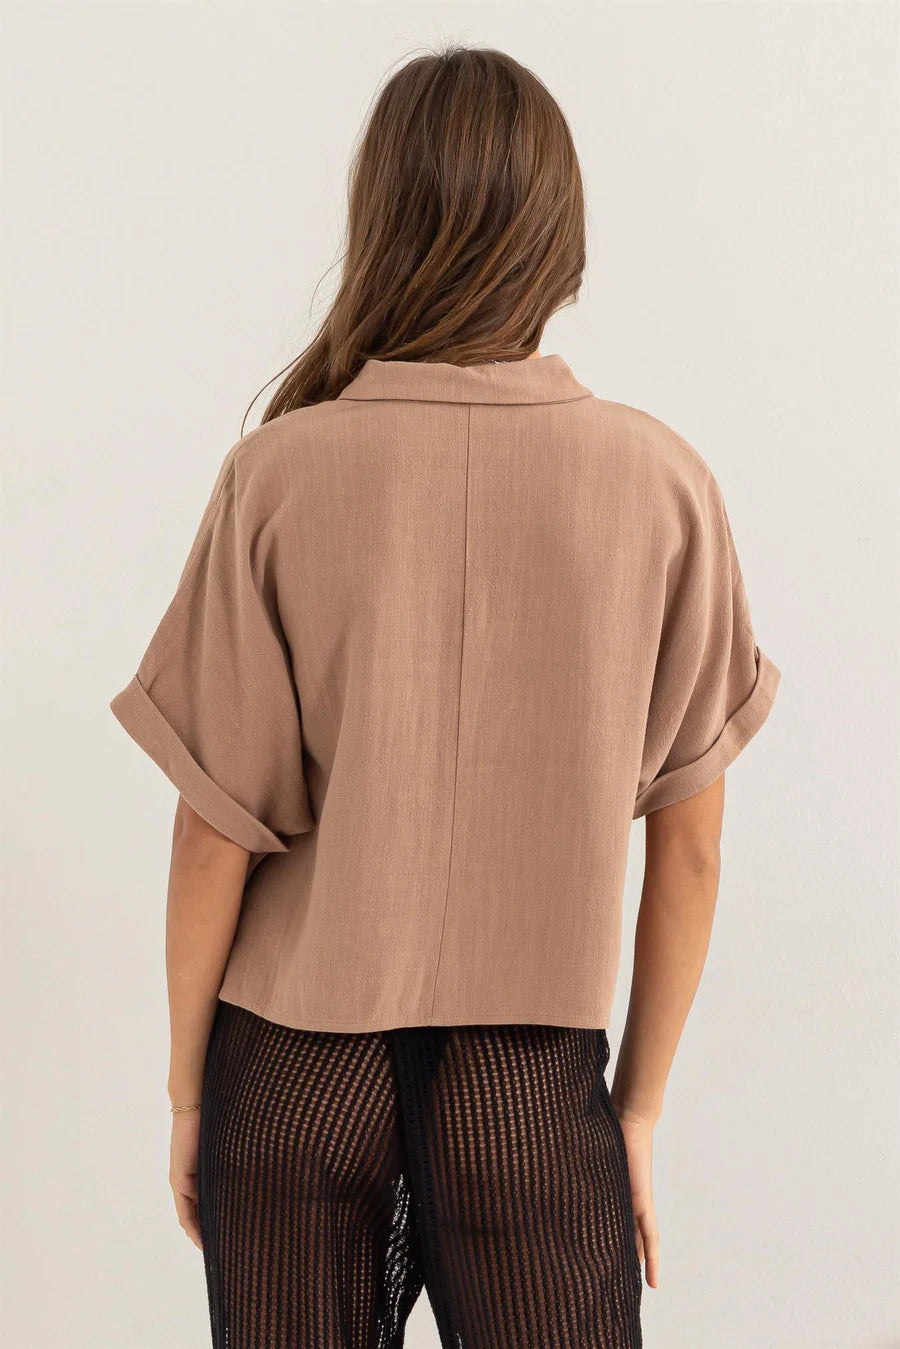 The Keep It Casual Linen Blend Top